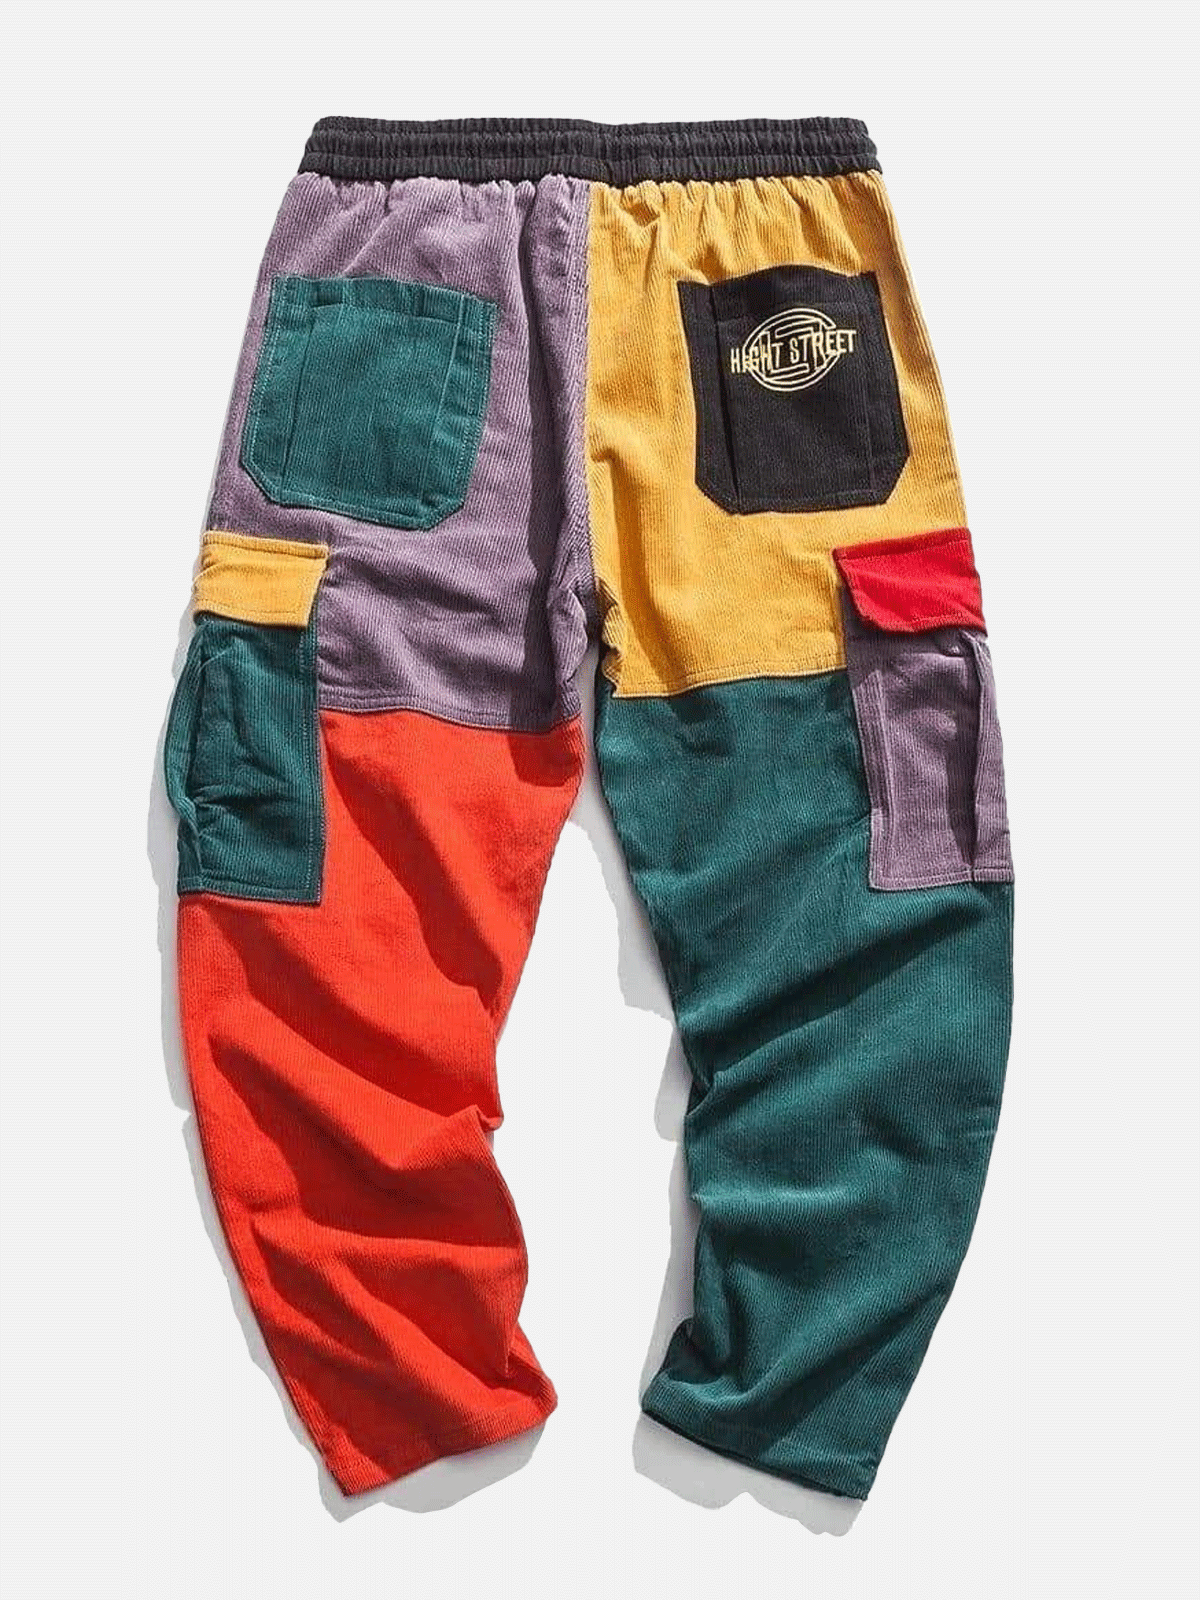 AE "Back to 90's" Patchwork Color Block Corduroy Pants Streetwear Brand Techwear Combat Tactical YUGEN THEORY